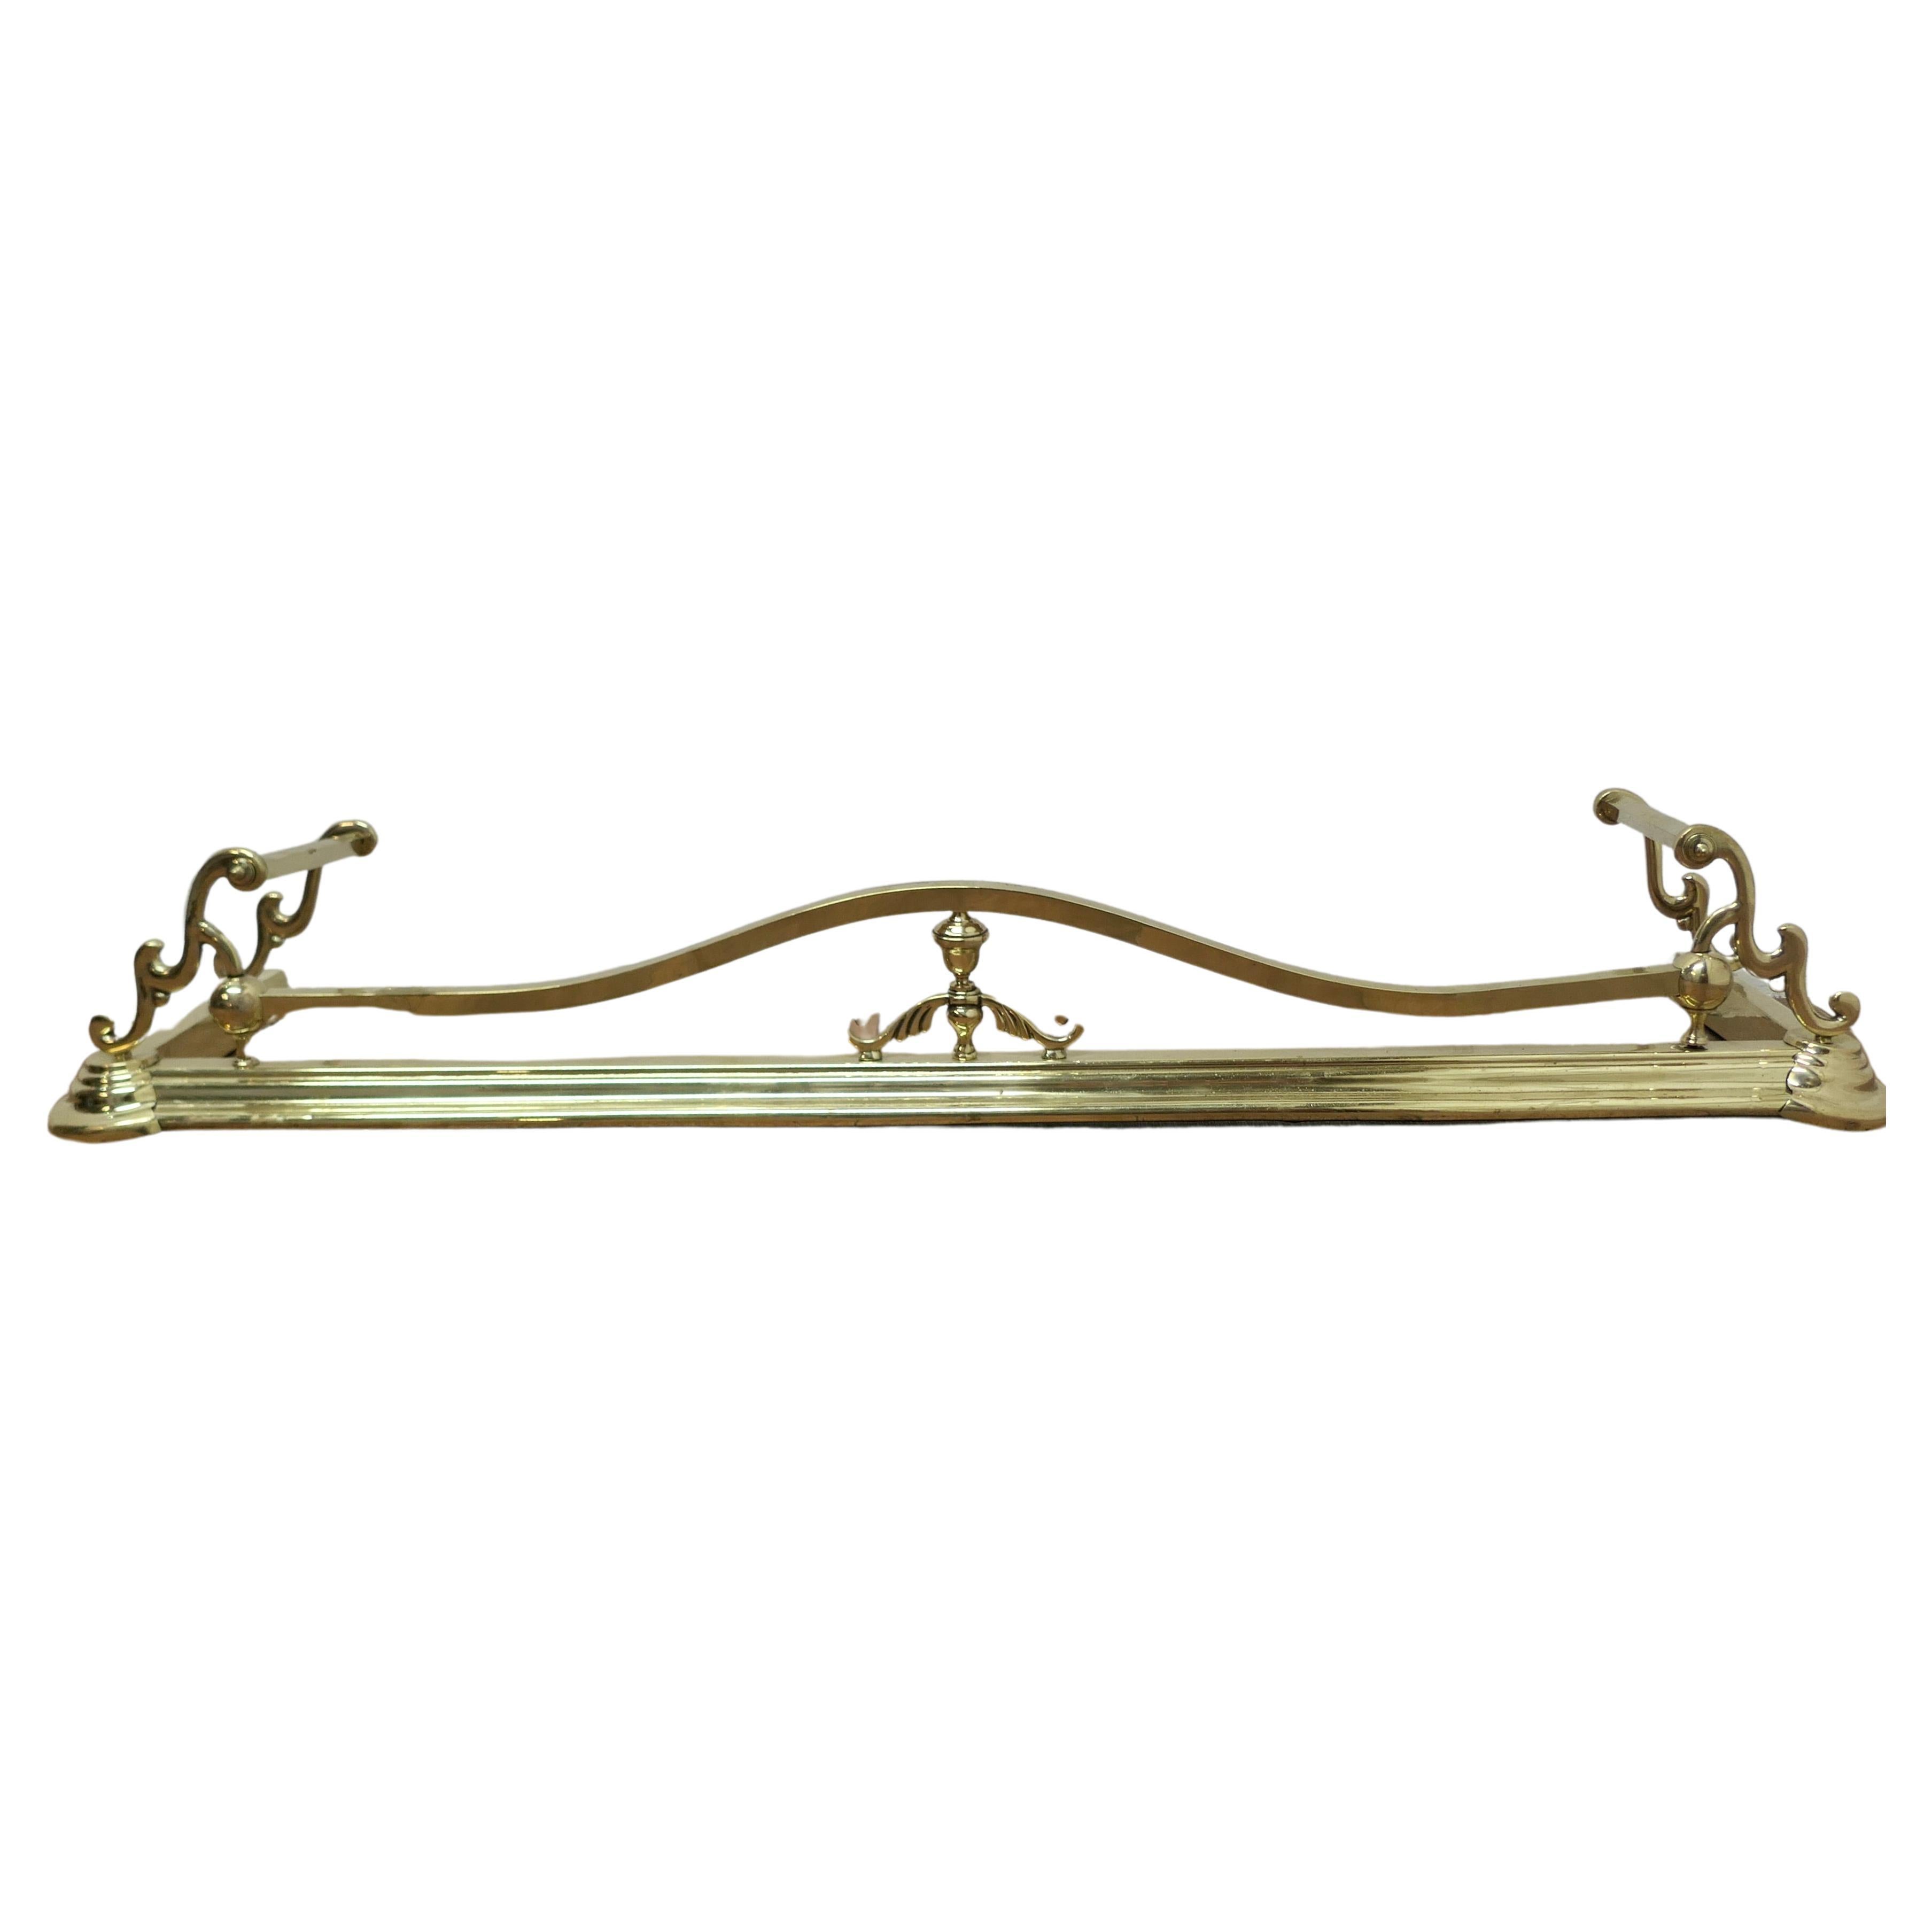 Long Art Nouveau Brass Fender  This is a Beautifully Designed Victorian Fender For Sale